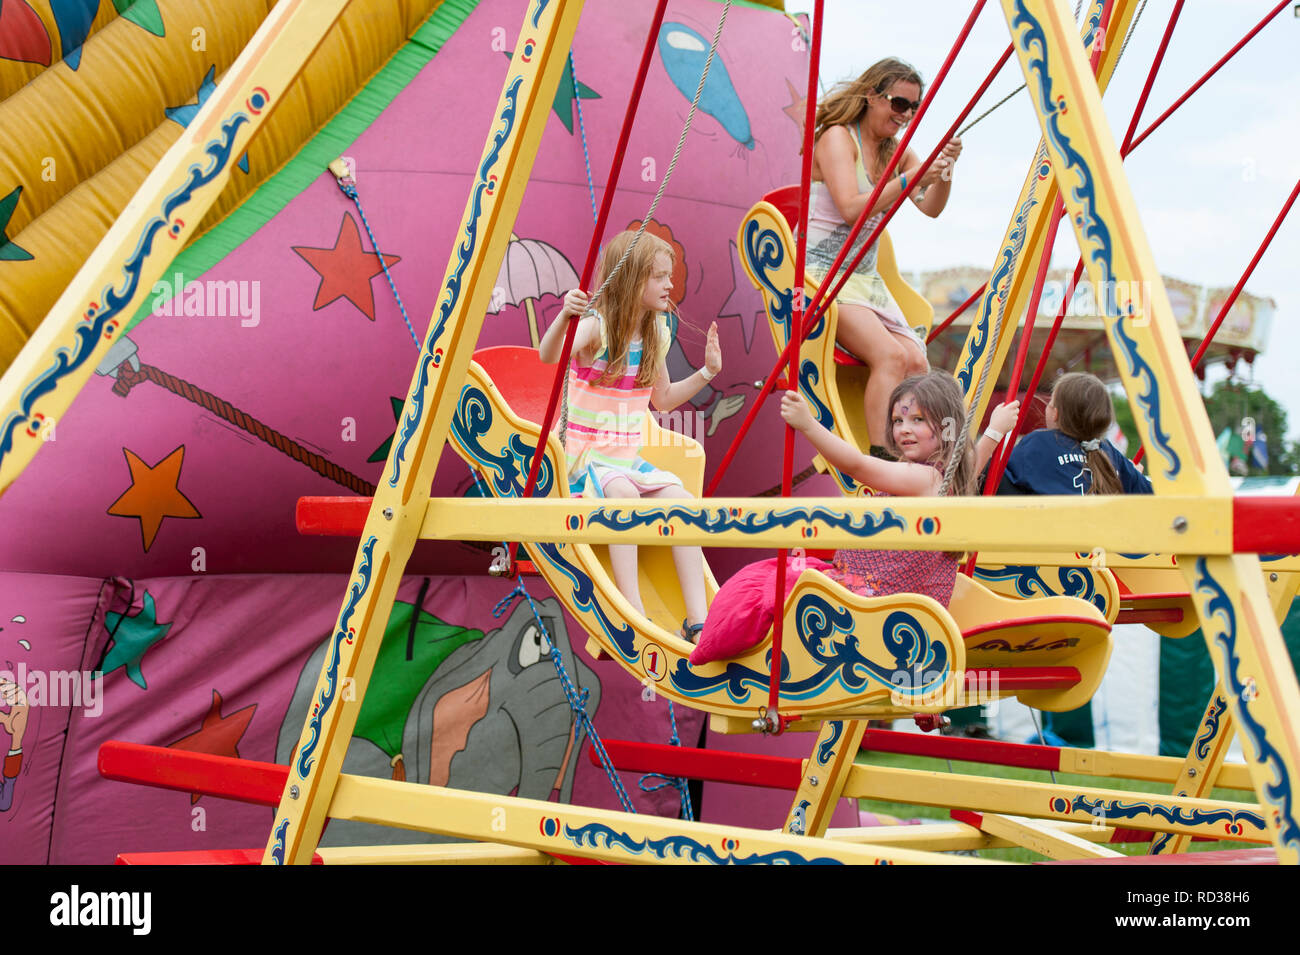 Children enjoying the swing boats at a music festival Stock Photo